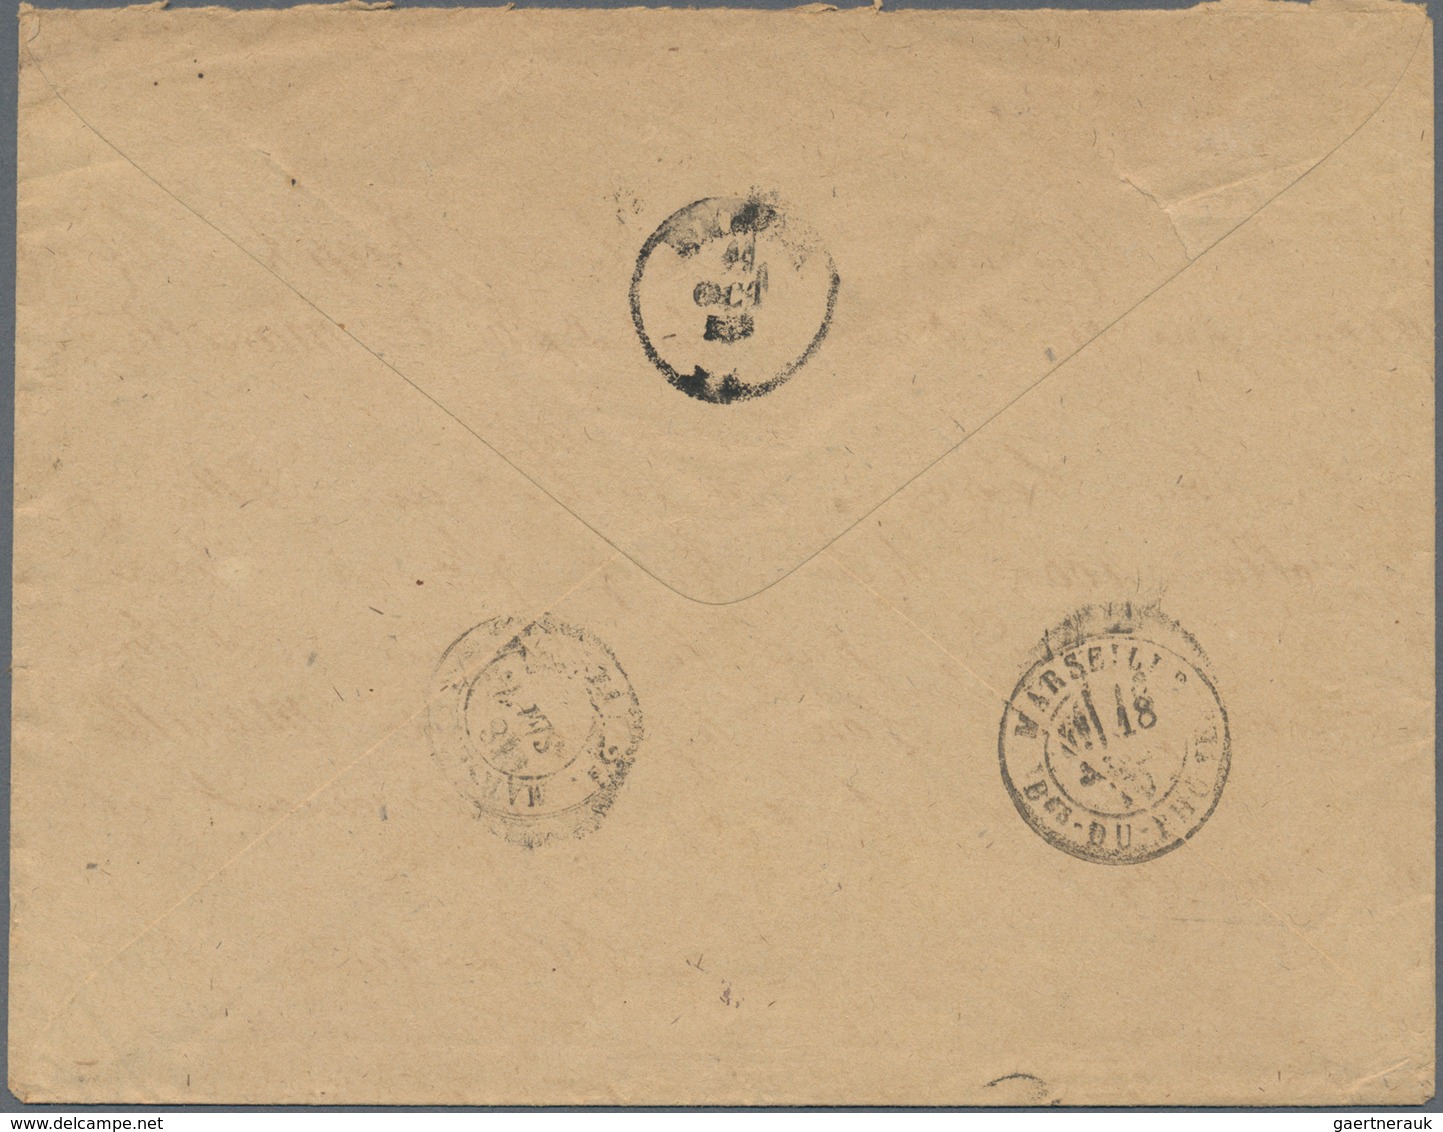 09617 Philippinen: 1879. Envelope Addressed To The French Scientific Mission In Manila, Philippines Bearin - Philippinen